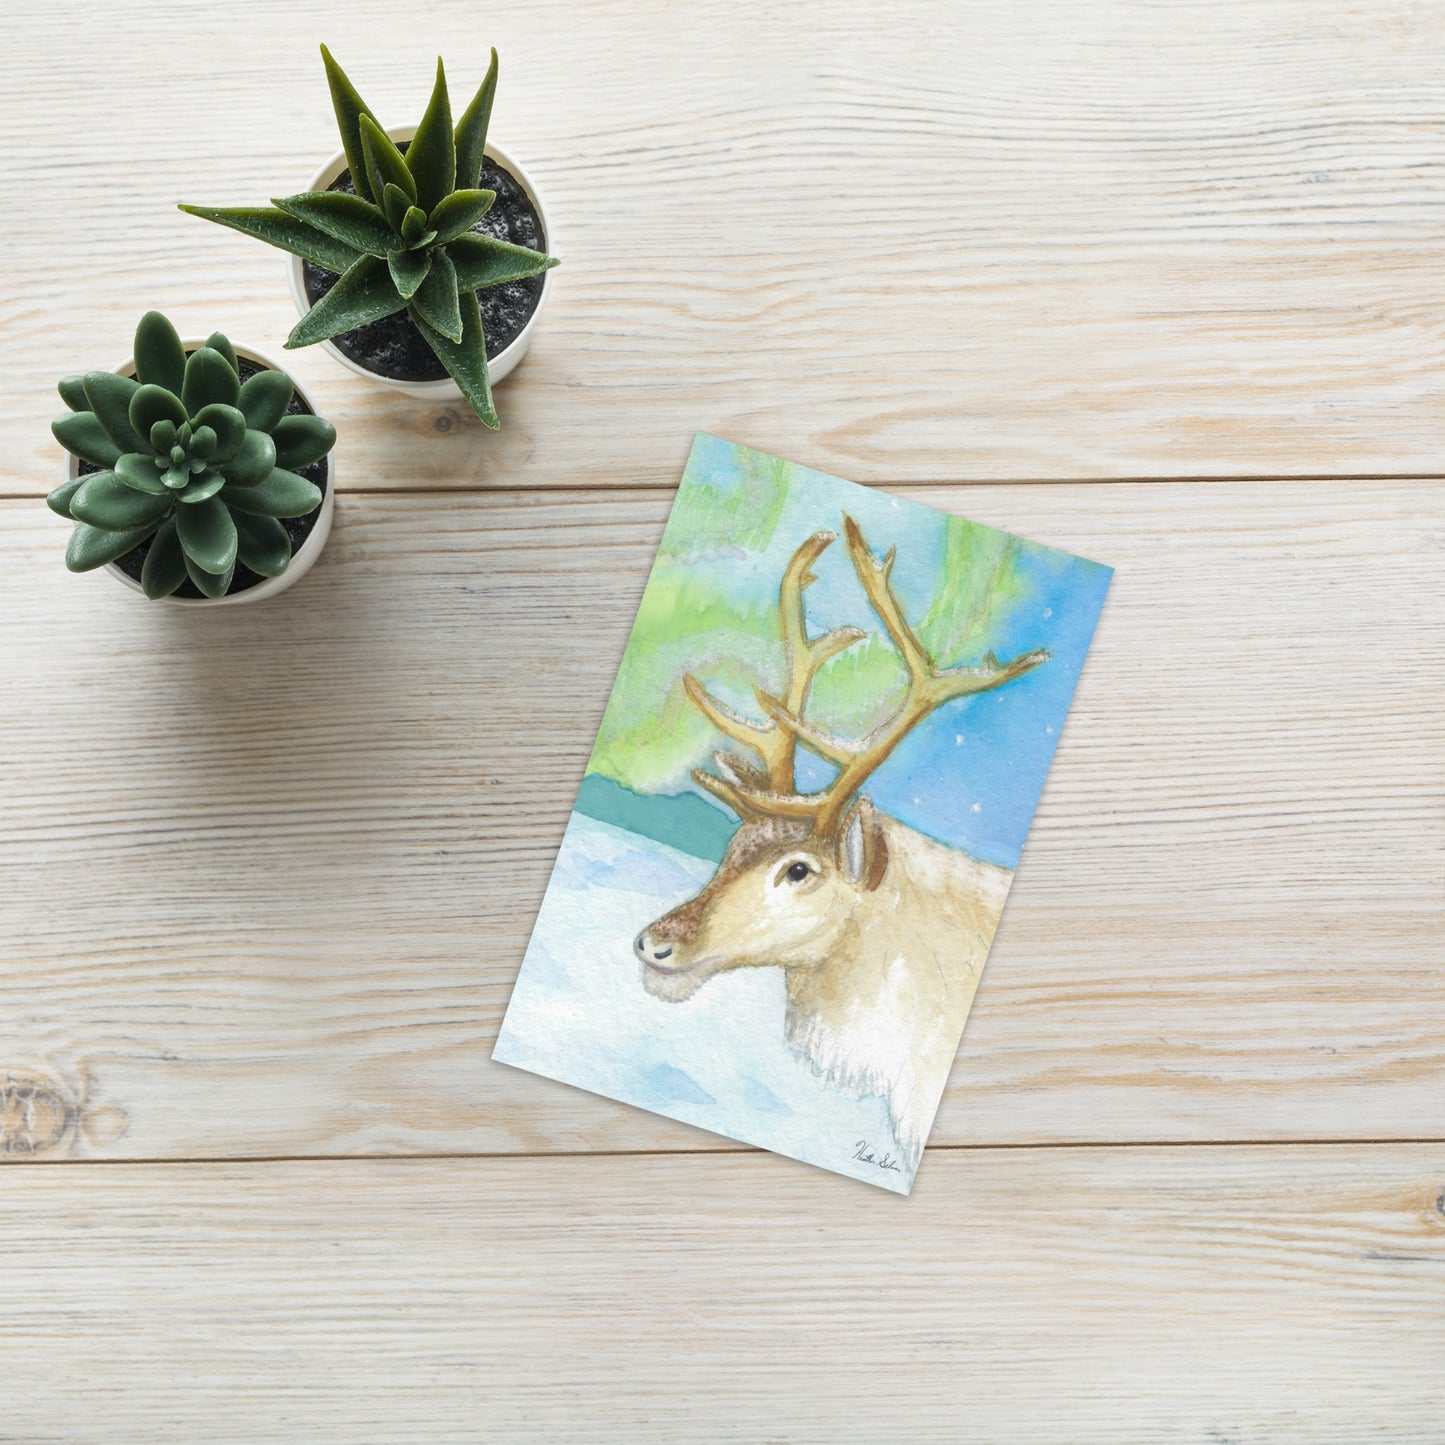 4 x 6 inch greeting card. Features watercolor print of a reindeer in the snow with northern lights in the sky. Blank inside. Comes with a white envelope. Shown on table by potted plants.